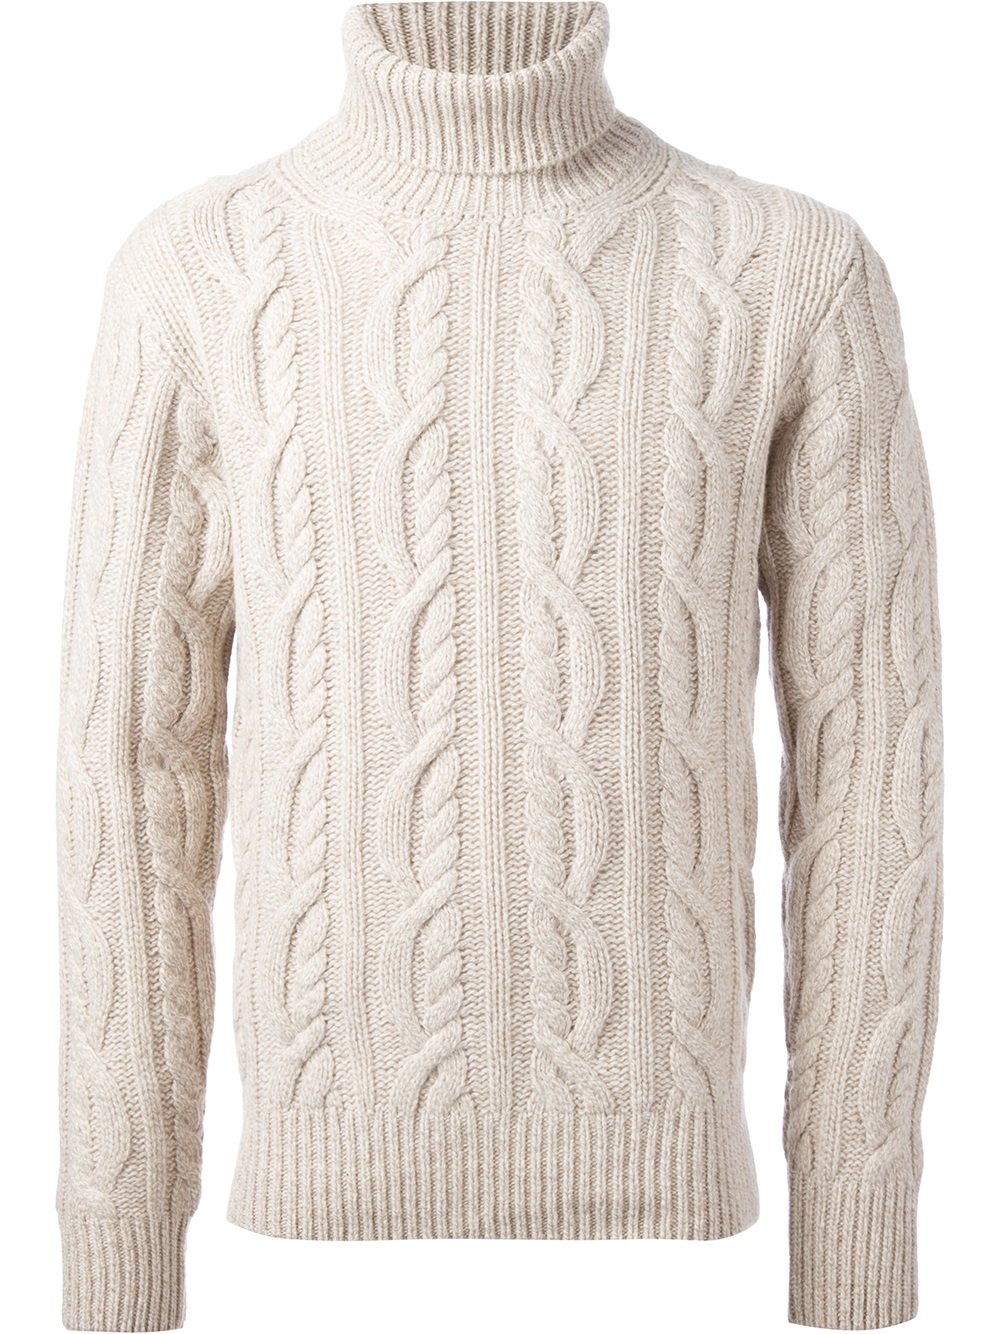 Hackett Cable Knit Roll Neck Sweater in White for Men - Lyst